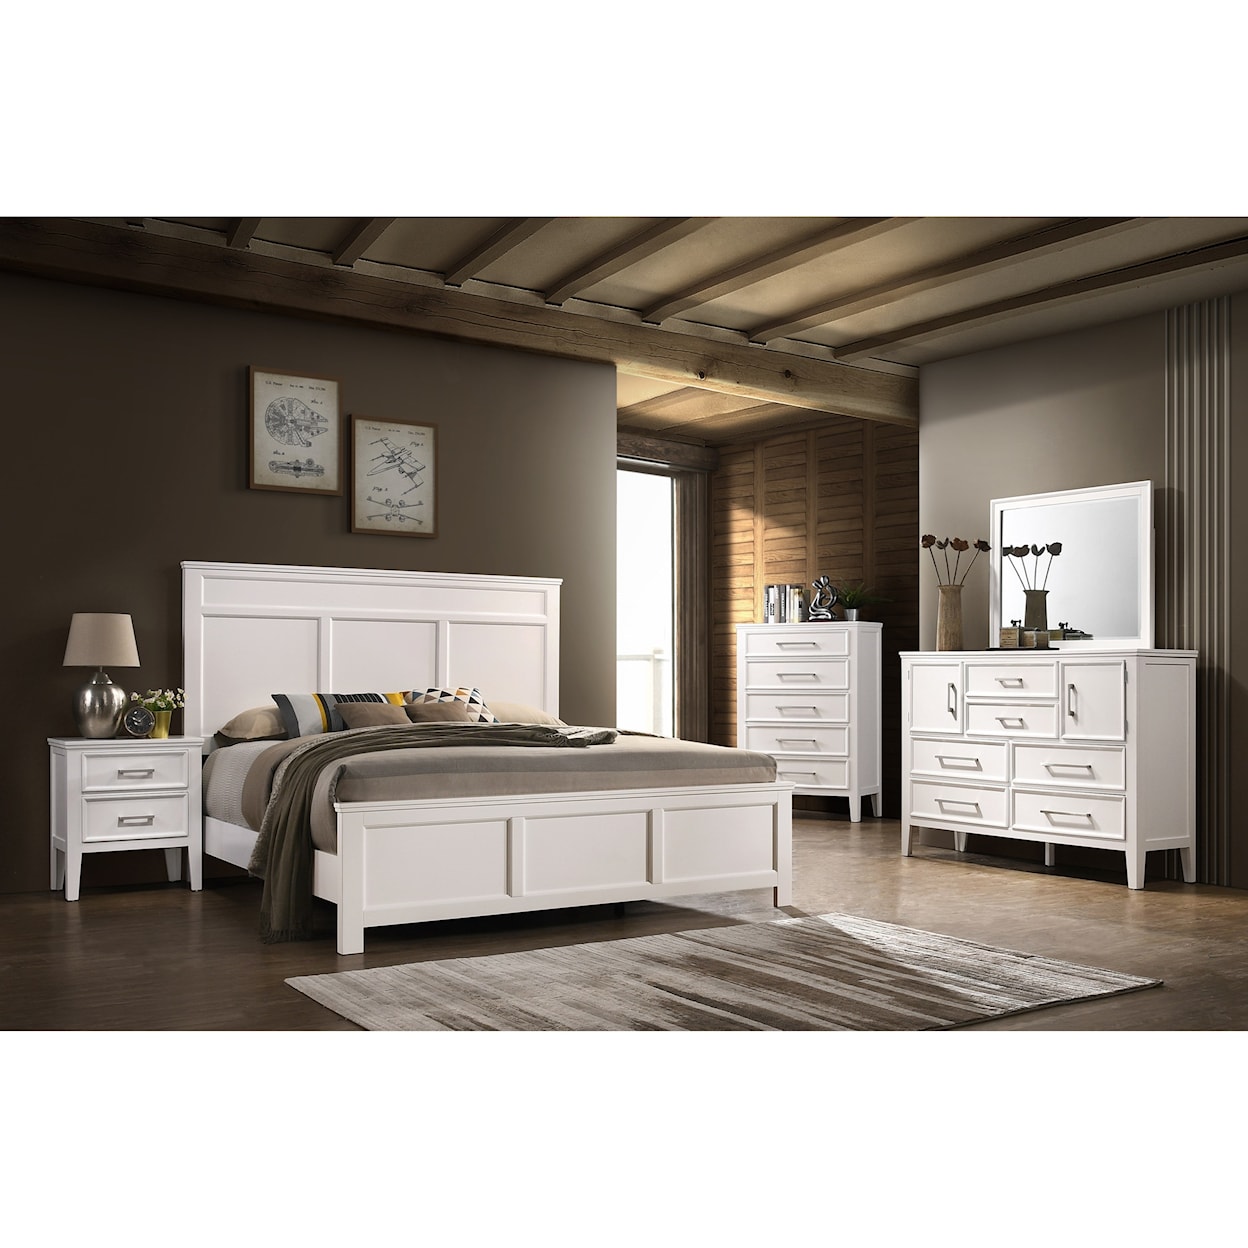 New Classic Furniture Andover Twin Bedroom Group